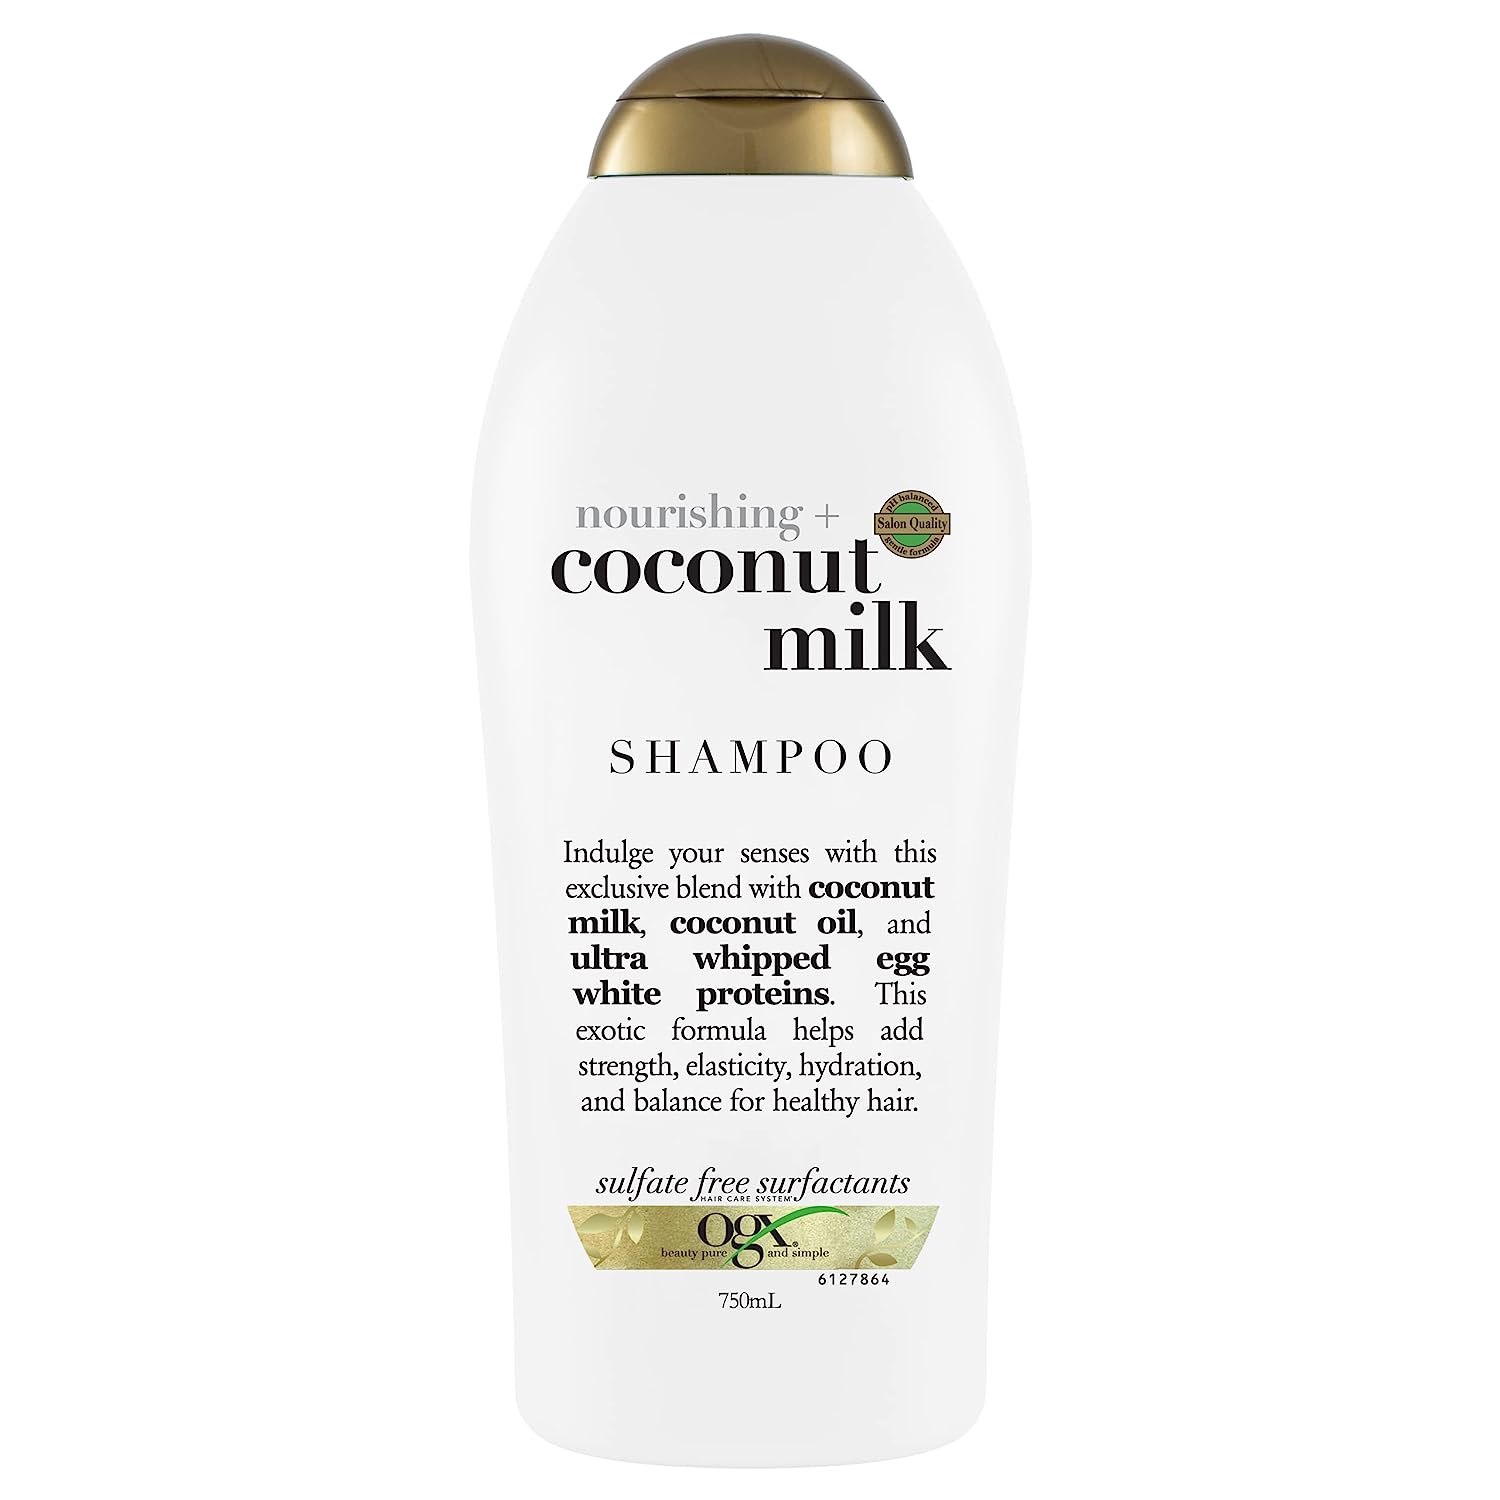 OGX Nourishing + Coconut Milk Moisturizing Shampoo for Strong & Healthy Hair, with Coconut Milk, Coconut Oil & Egg White Protein, Paraben-Free, Sulfate-Free Surfactants, 25.4